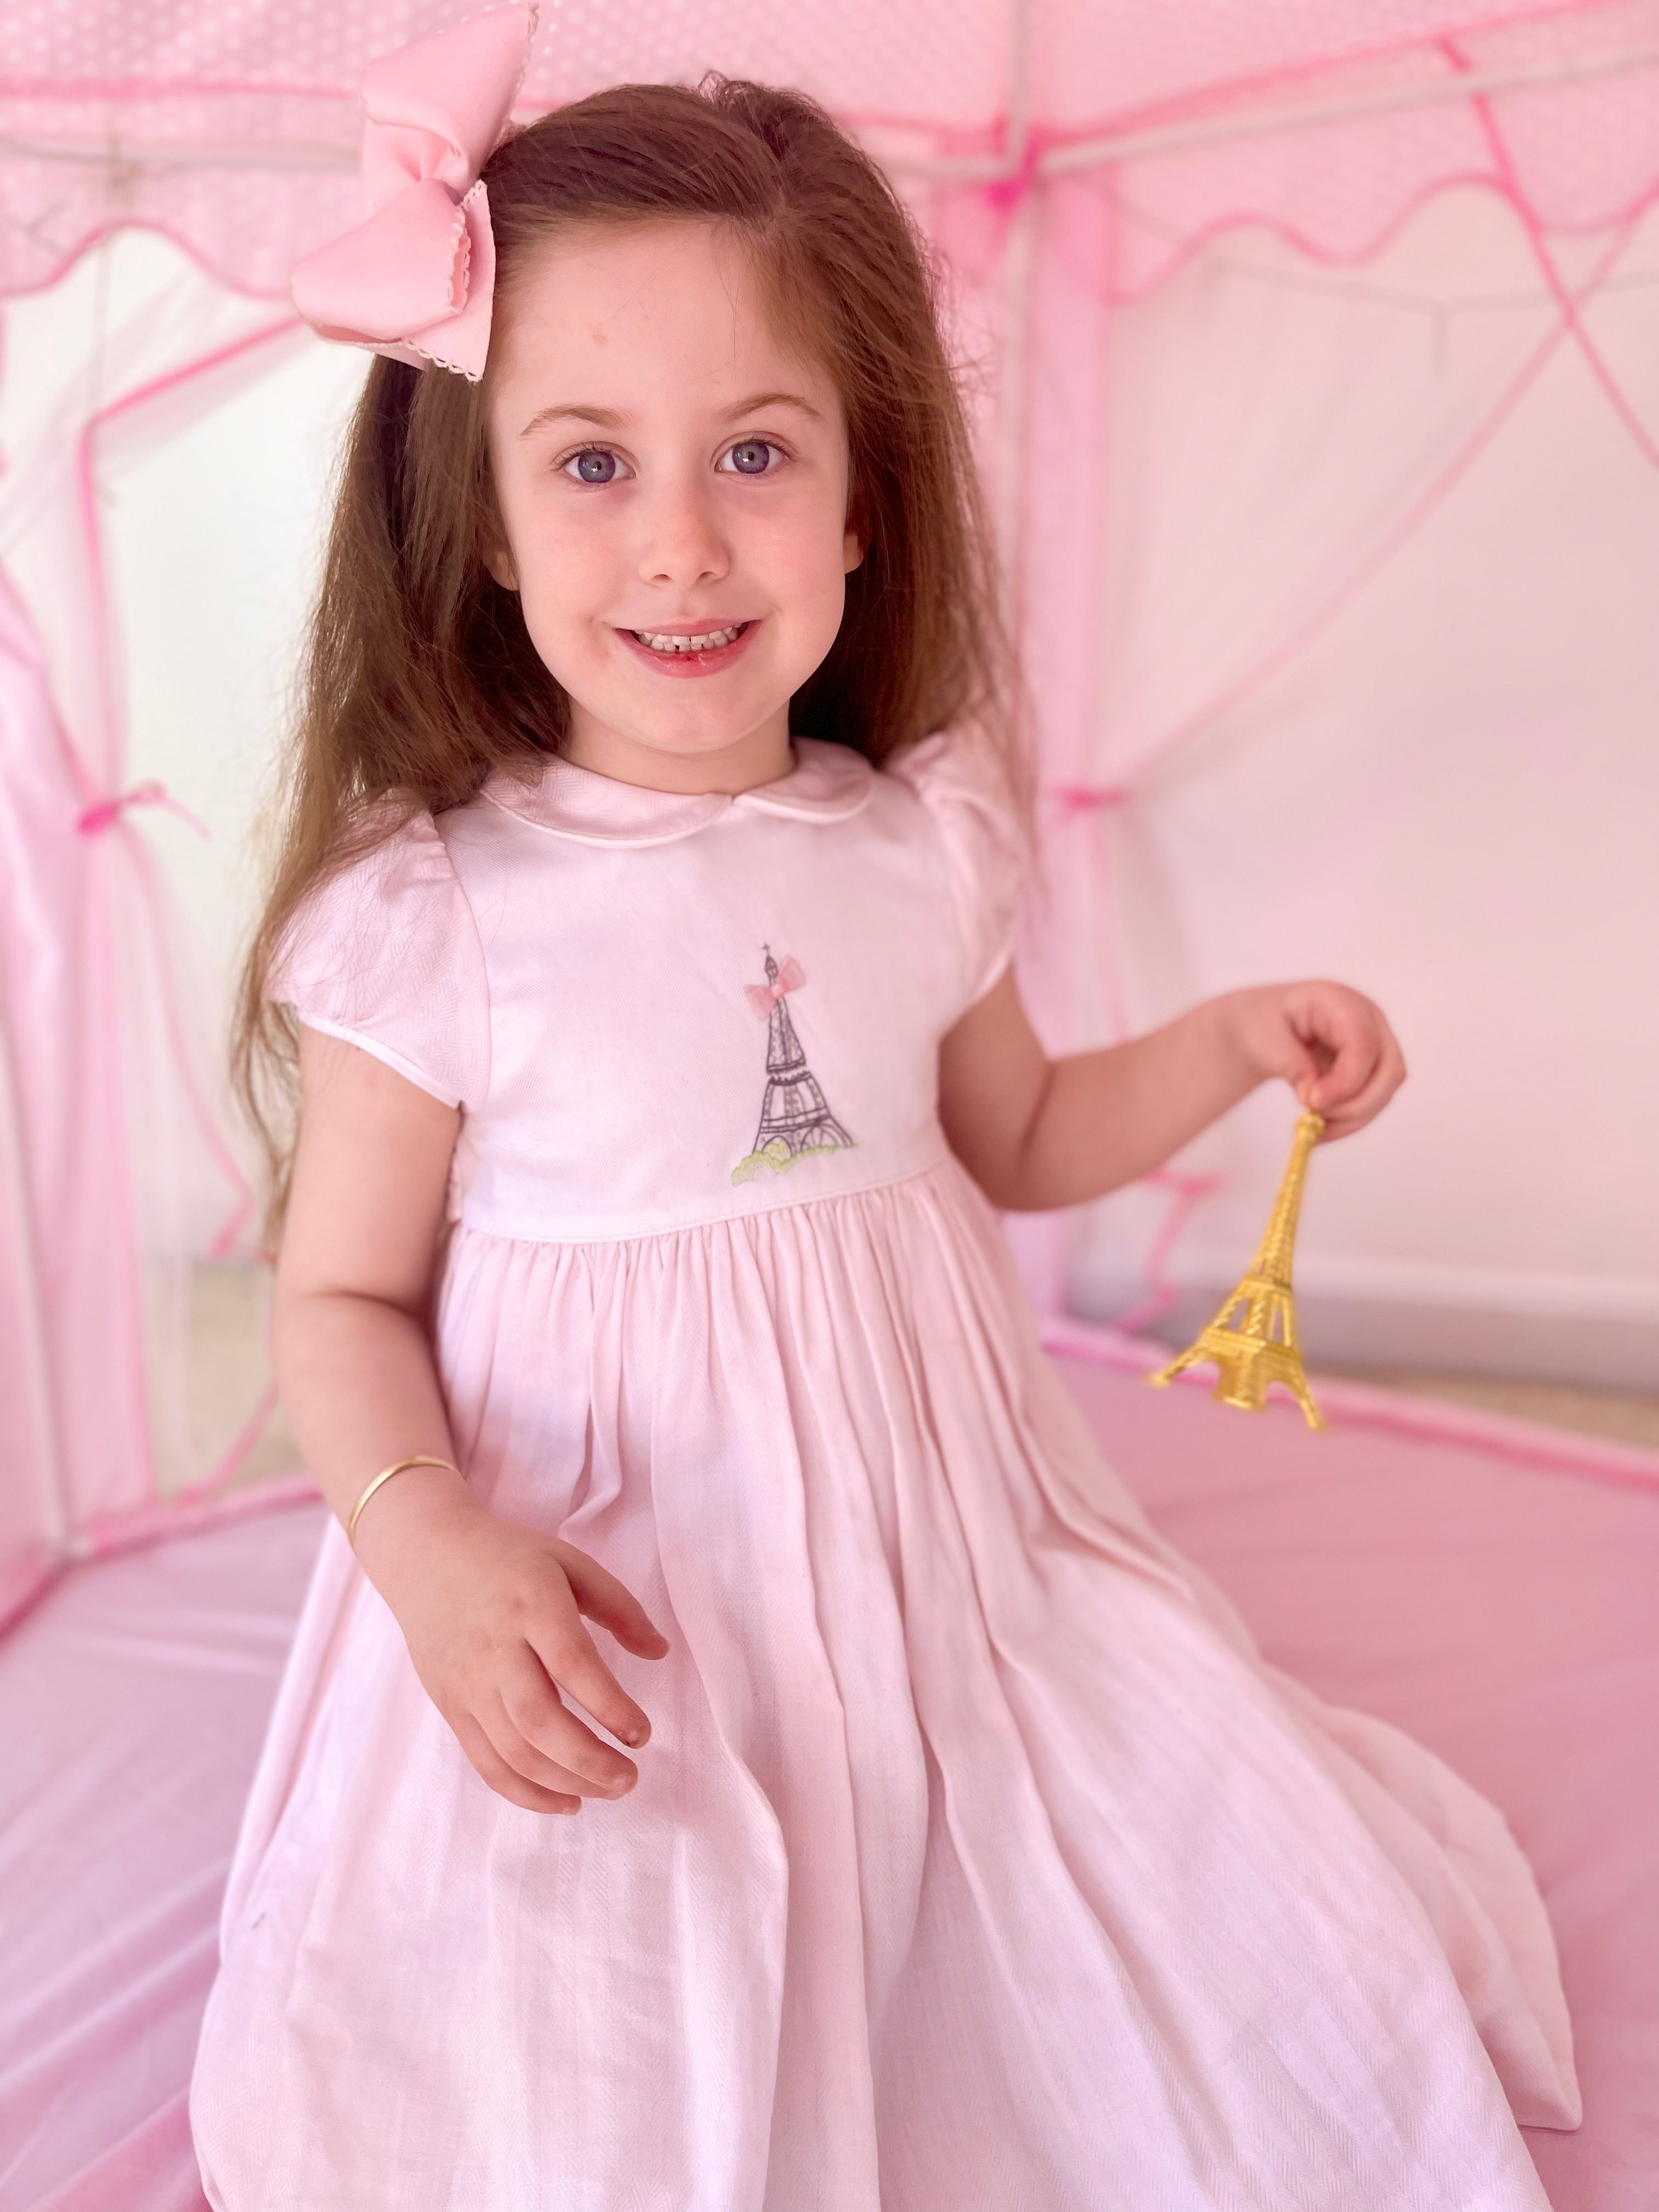 Paris themed pink Eiffel Tower birthday party inspiration for children